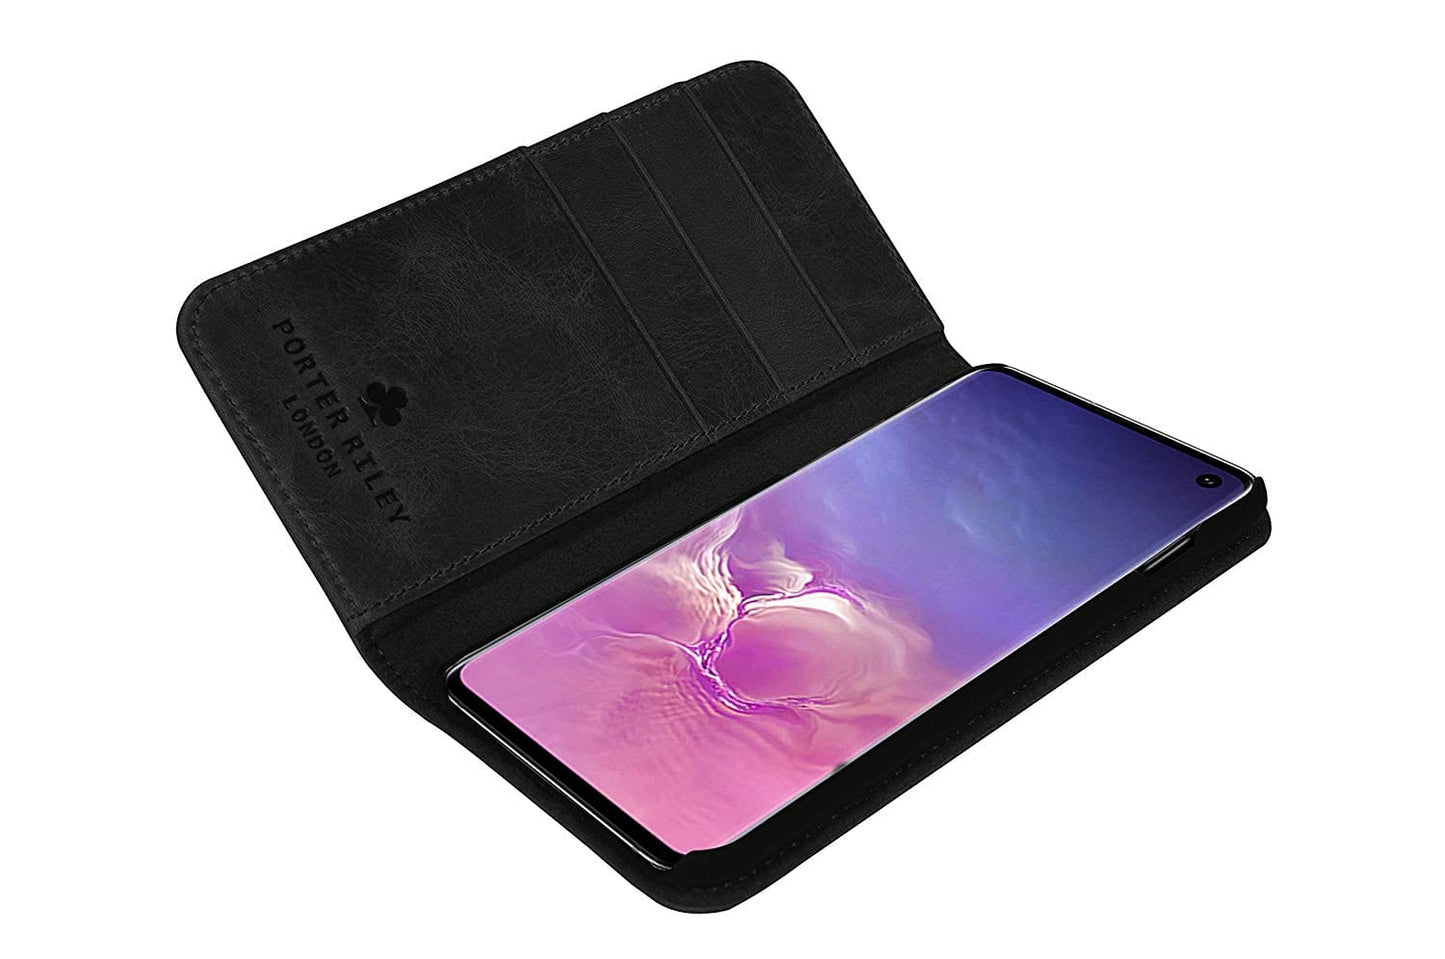 Samsung Galaxy S10 Leather Case. Premium Slim Genuine Leather Stand Case/Cover/Wallet (Pure Black)